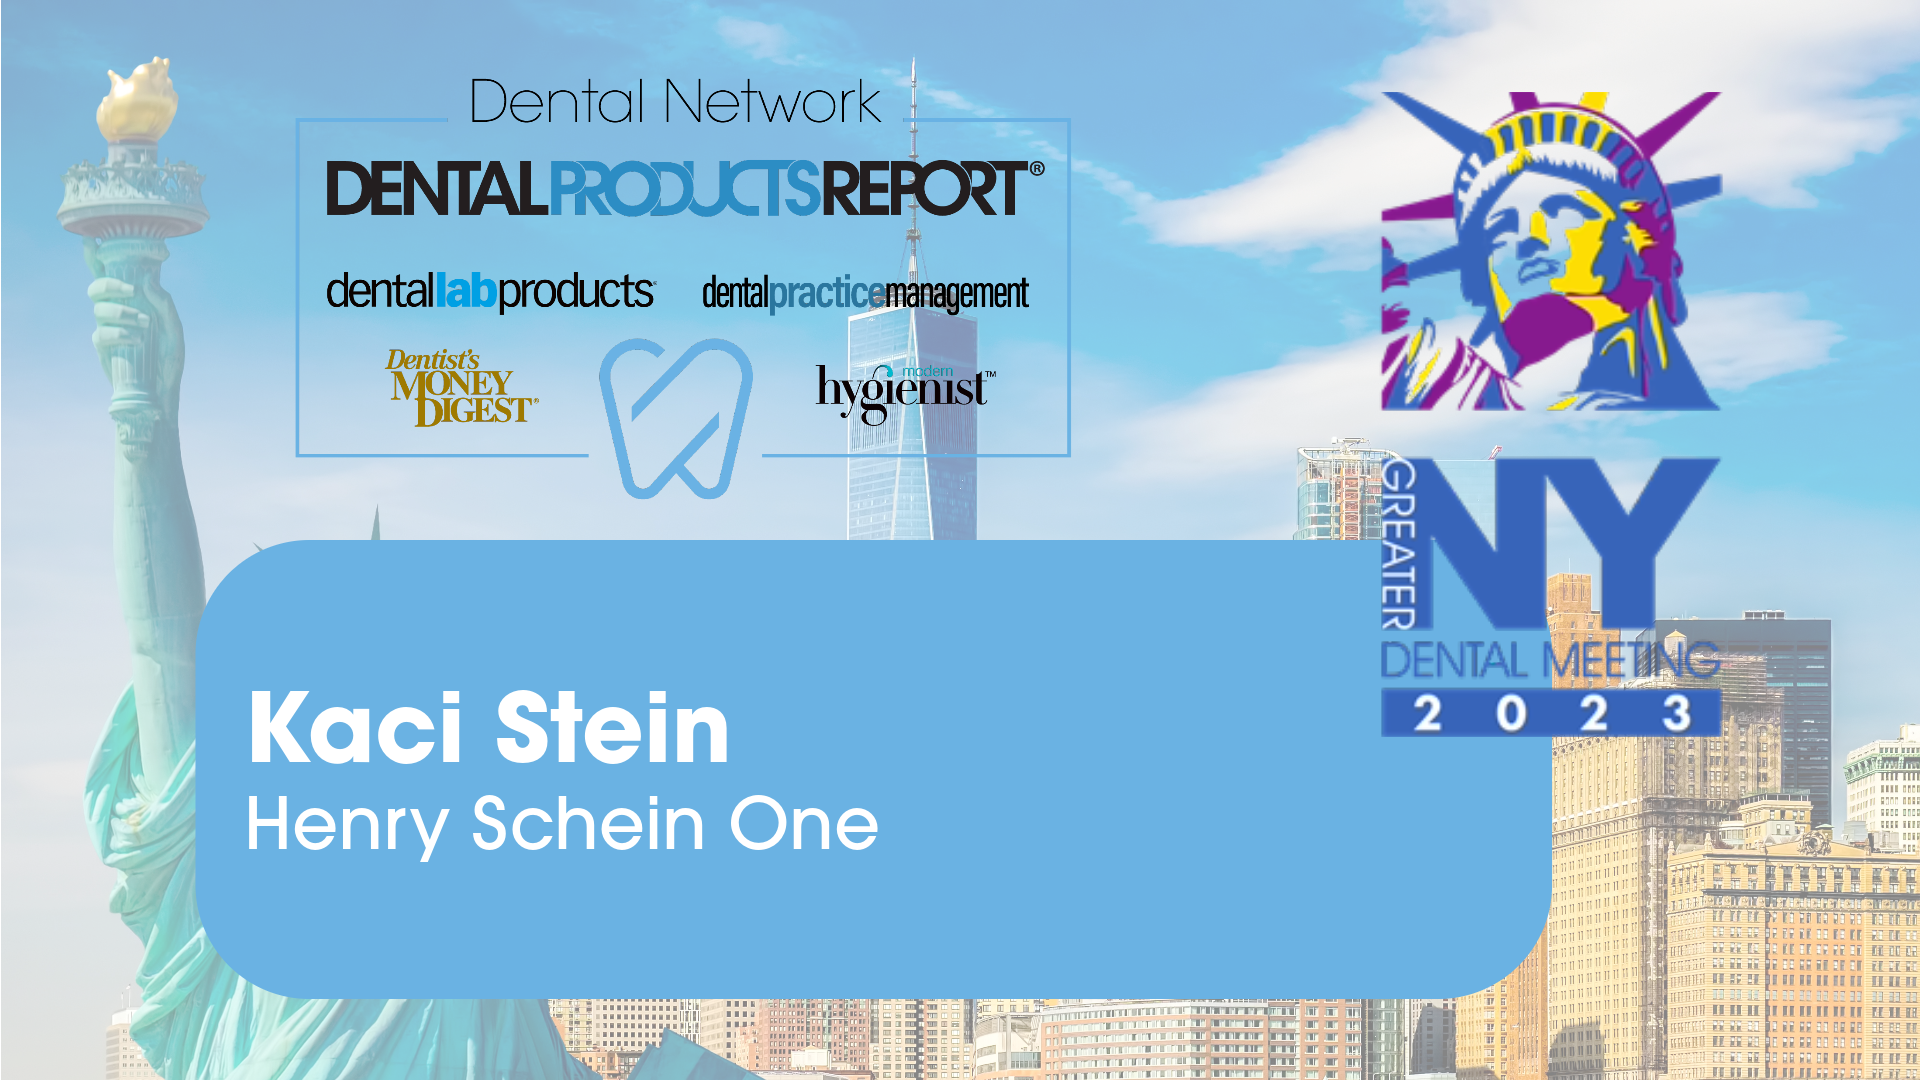 Greater New York Dental Meeting 2023 – Interview with Kaci Stein from Henry Schein One